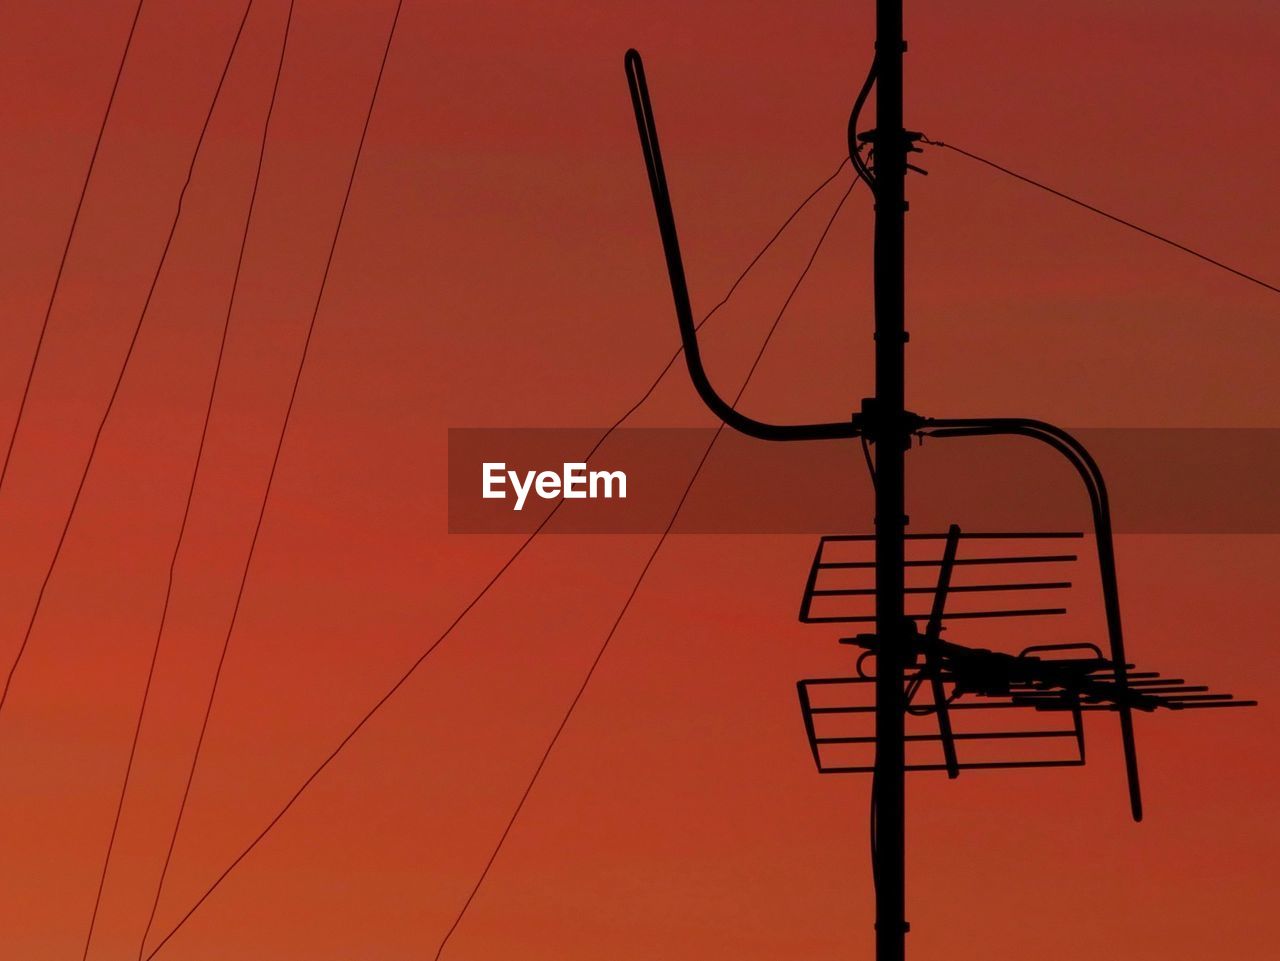 LOW ANGLE VIEW OF SILHOUETTE ELECTRICITY PYLON AGAINST SKY